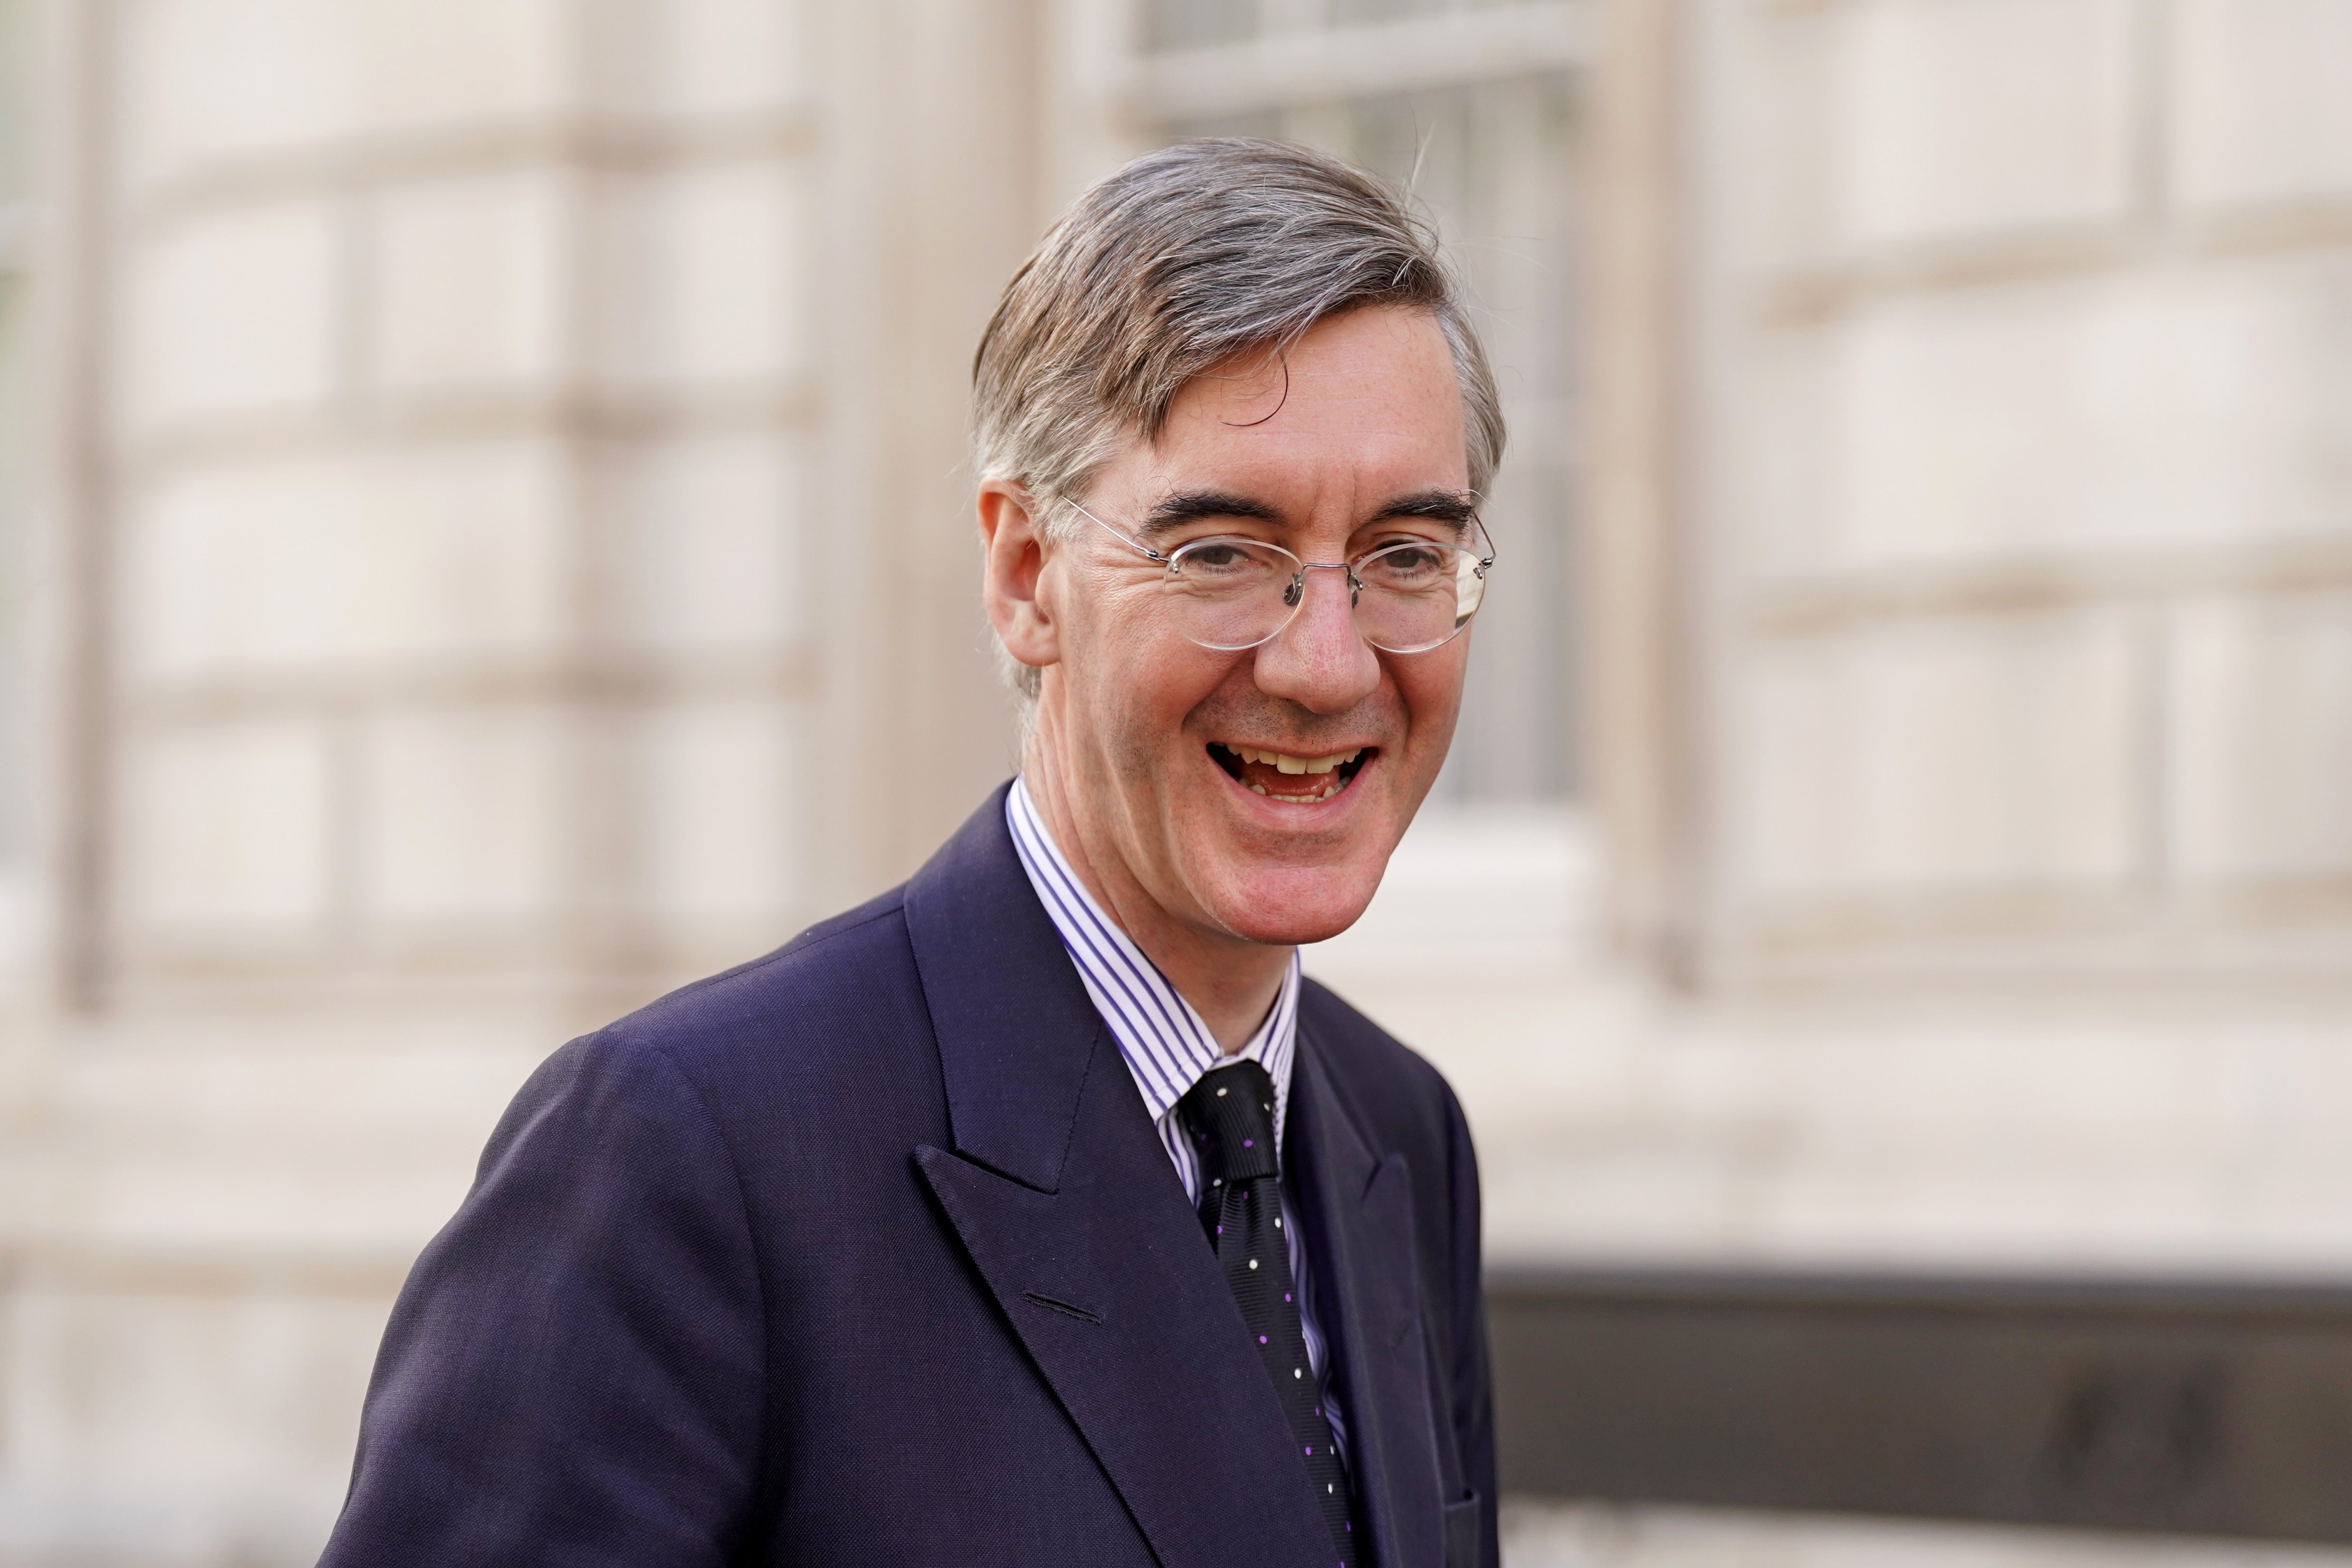 Jacob Rees-Mogg is one of the ministers leading a review into retained EU regulations